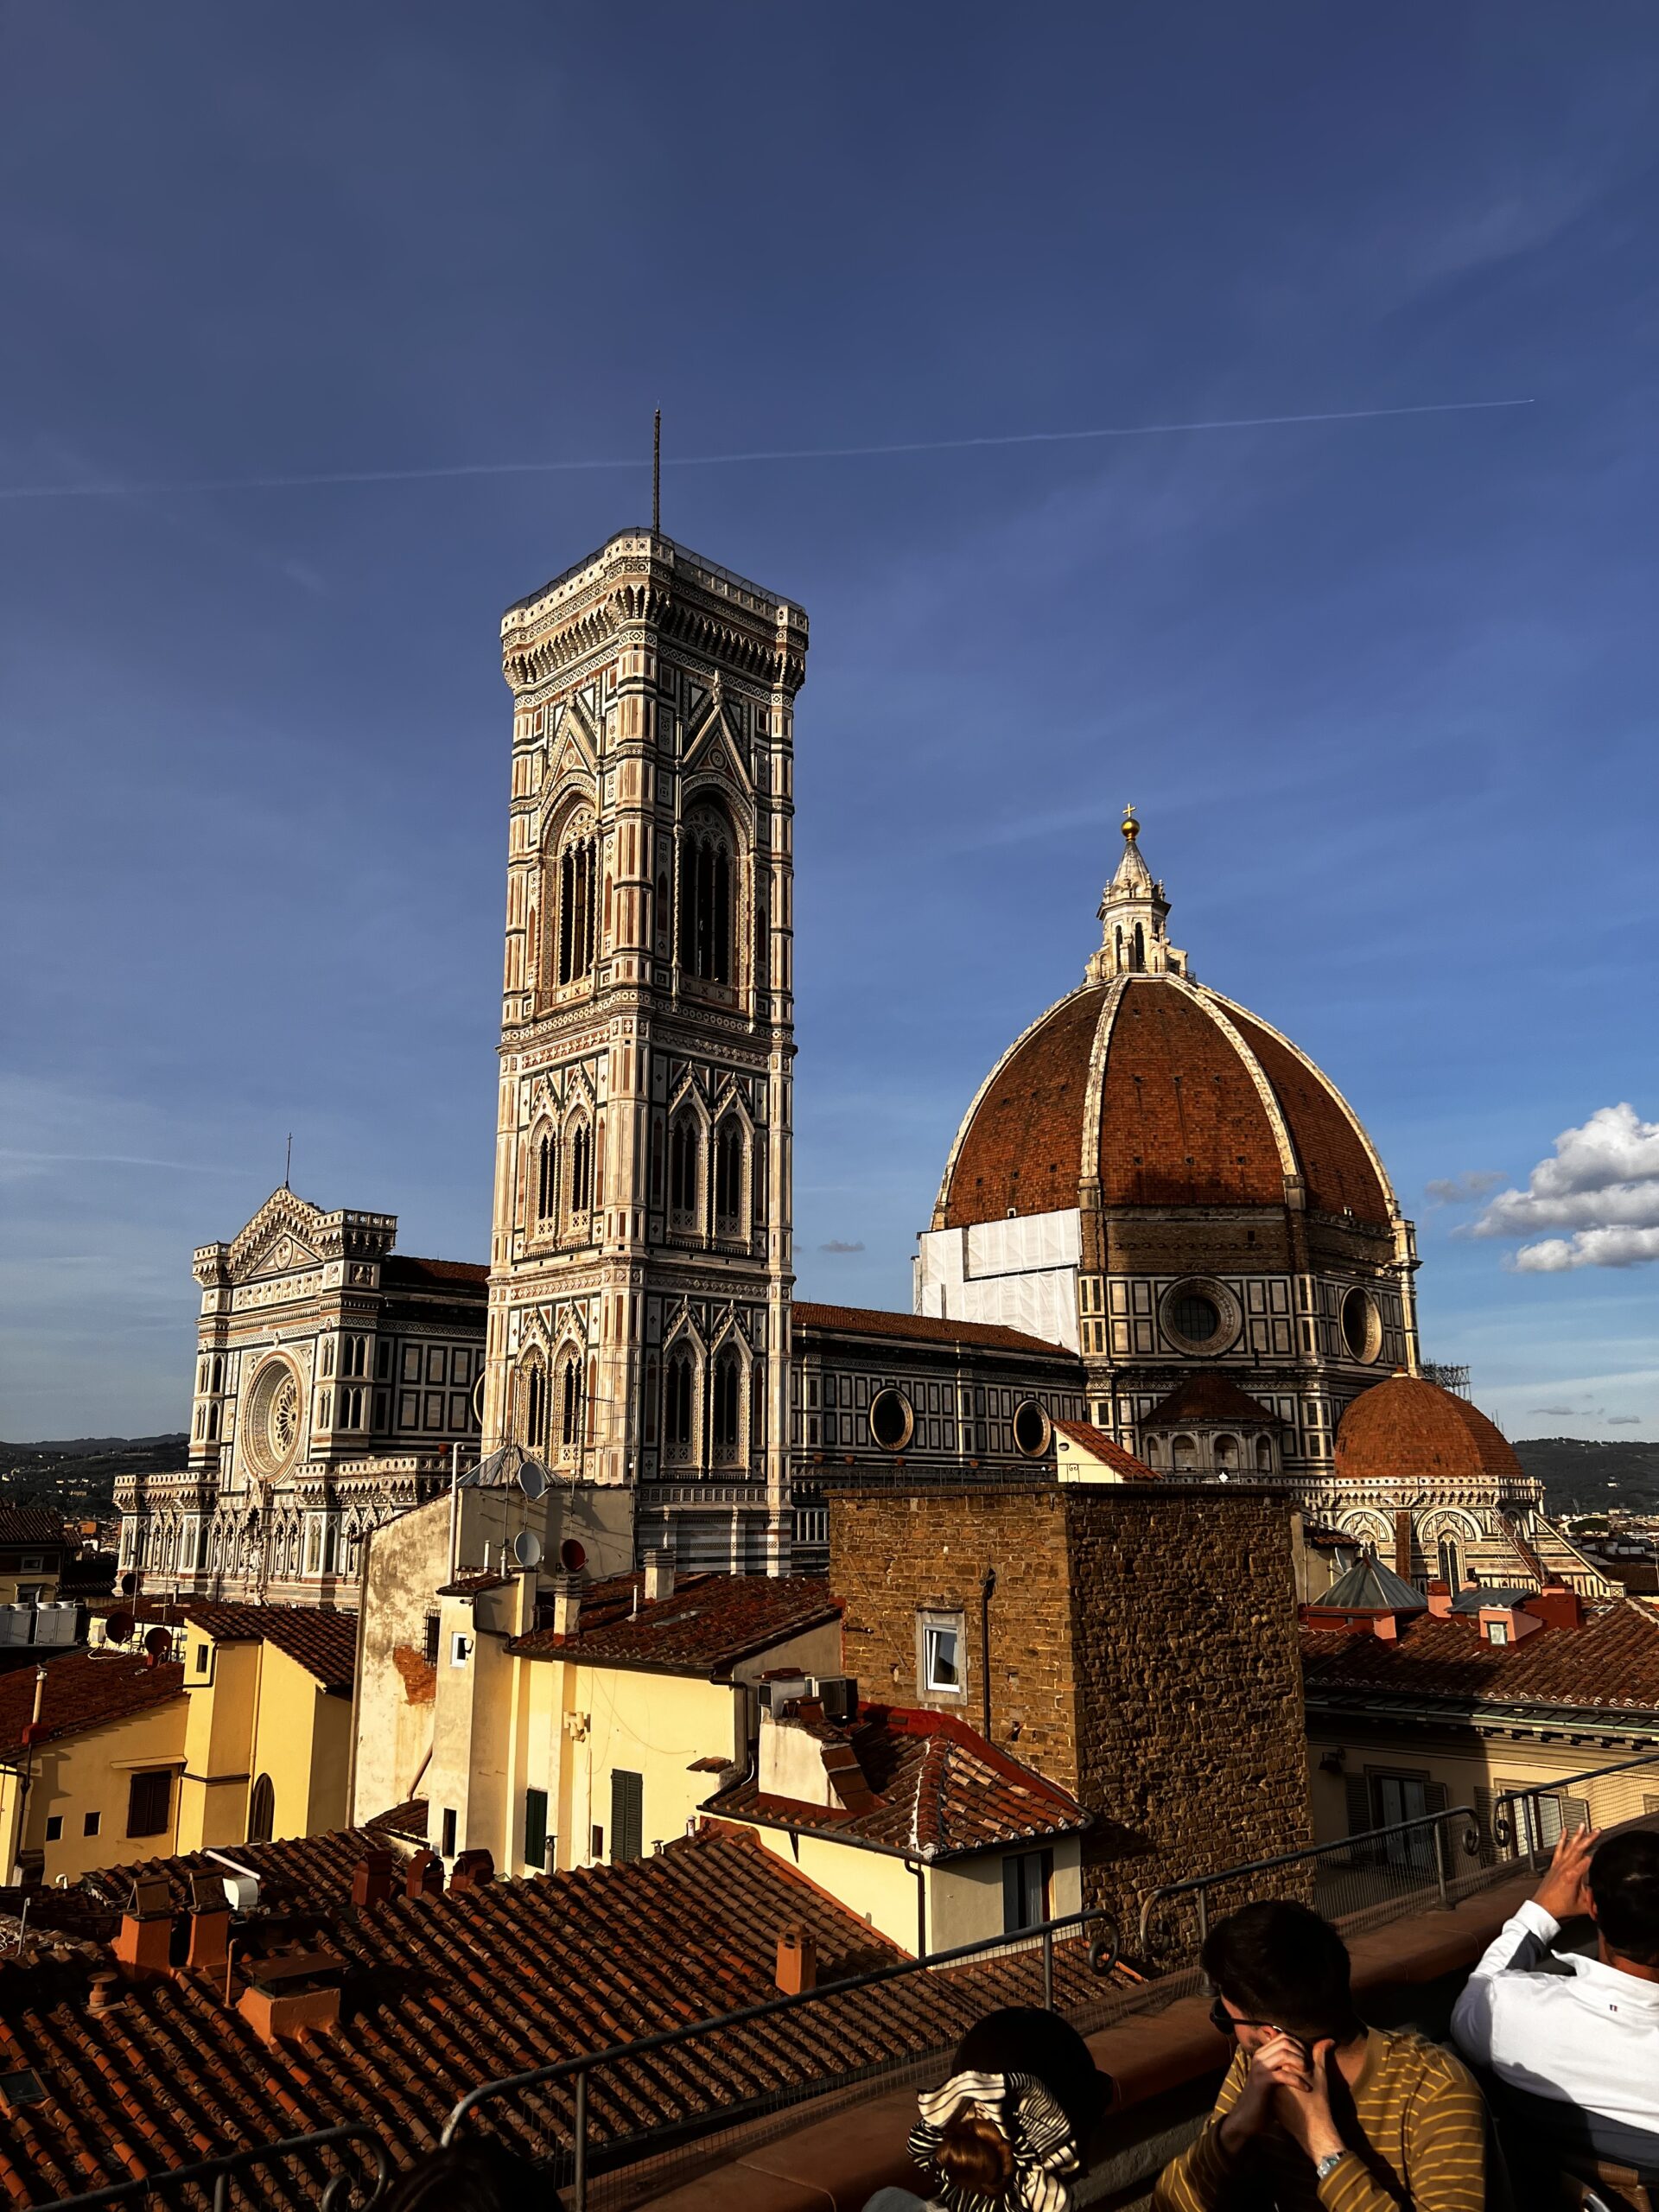 Europe With Friends > Part 4:  7 Things We Did in Florence, Italy